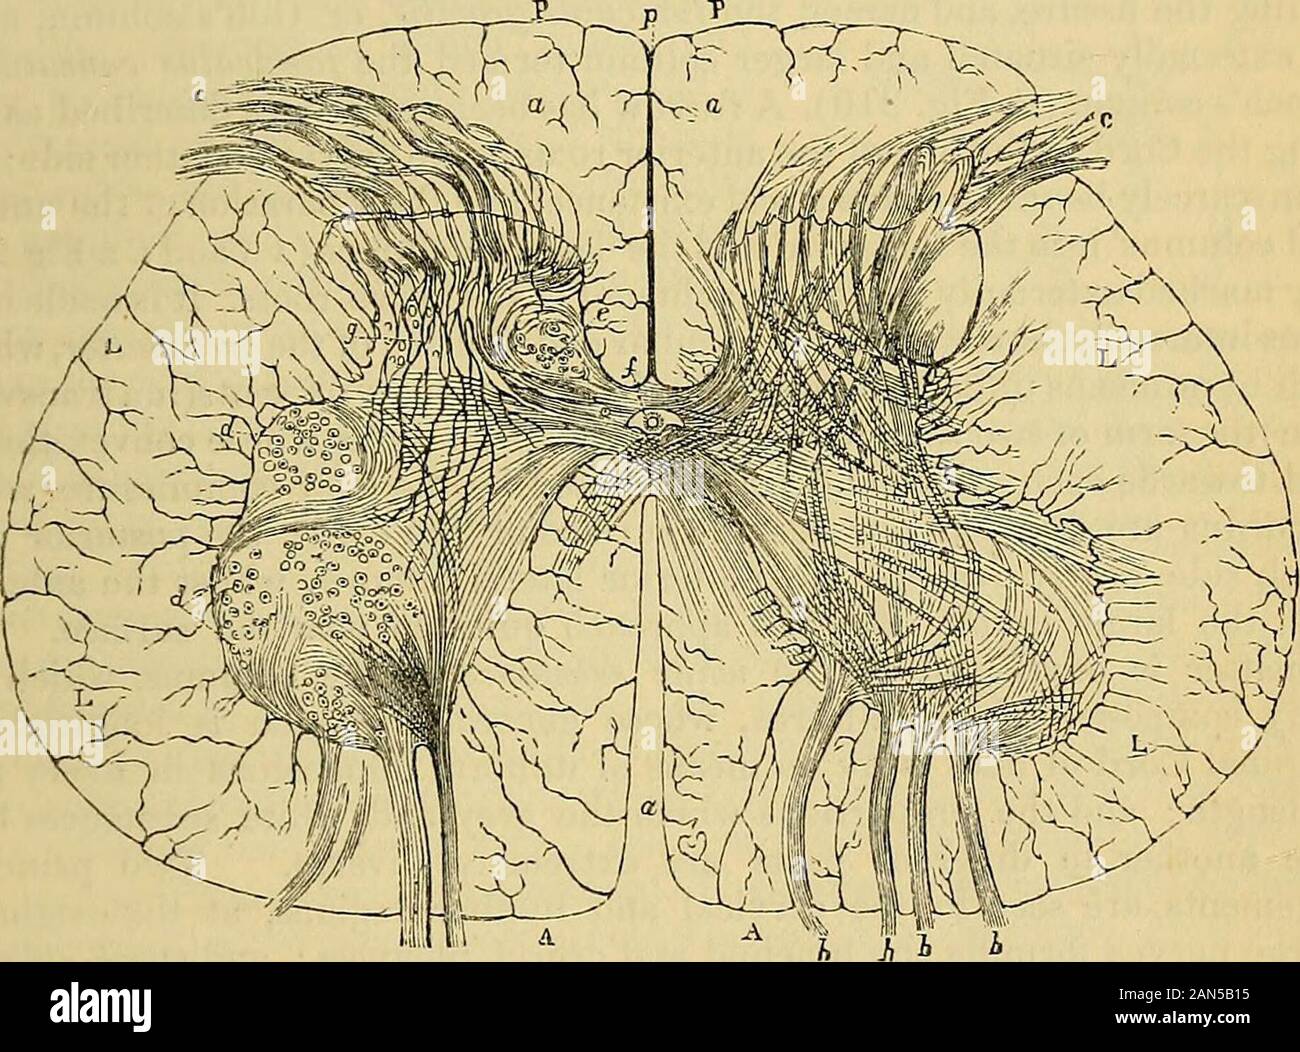 Carpenter's principles of human physiology . s, a translation of hispaper entitled Die Ergebnisse neuerer Untersuchung, &c, in Fosters Journal of Physio-logy, vol. i. 1878, p. 196. STRUCTURE OF THE SPINAL CORD. 565 mence with the Cranio-Spinal Axis; which, as already pointed out, may beconsidered as constituting the fundamental portion of this apparatus. Theentire Axis is divided into its Cranial and its Spinal portions, the passage ofthe Cord through the foramen magnum of the occipital bone being con-sidered to mark the boundary between them; and although the separation ofthe Medulla Spinalis Stock Photo